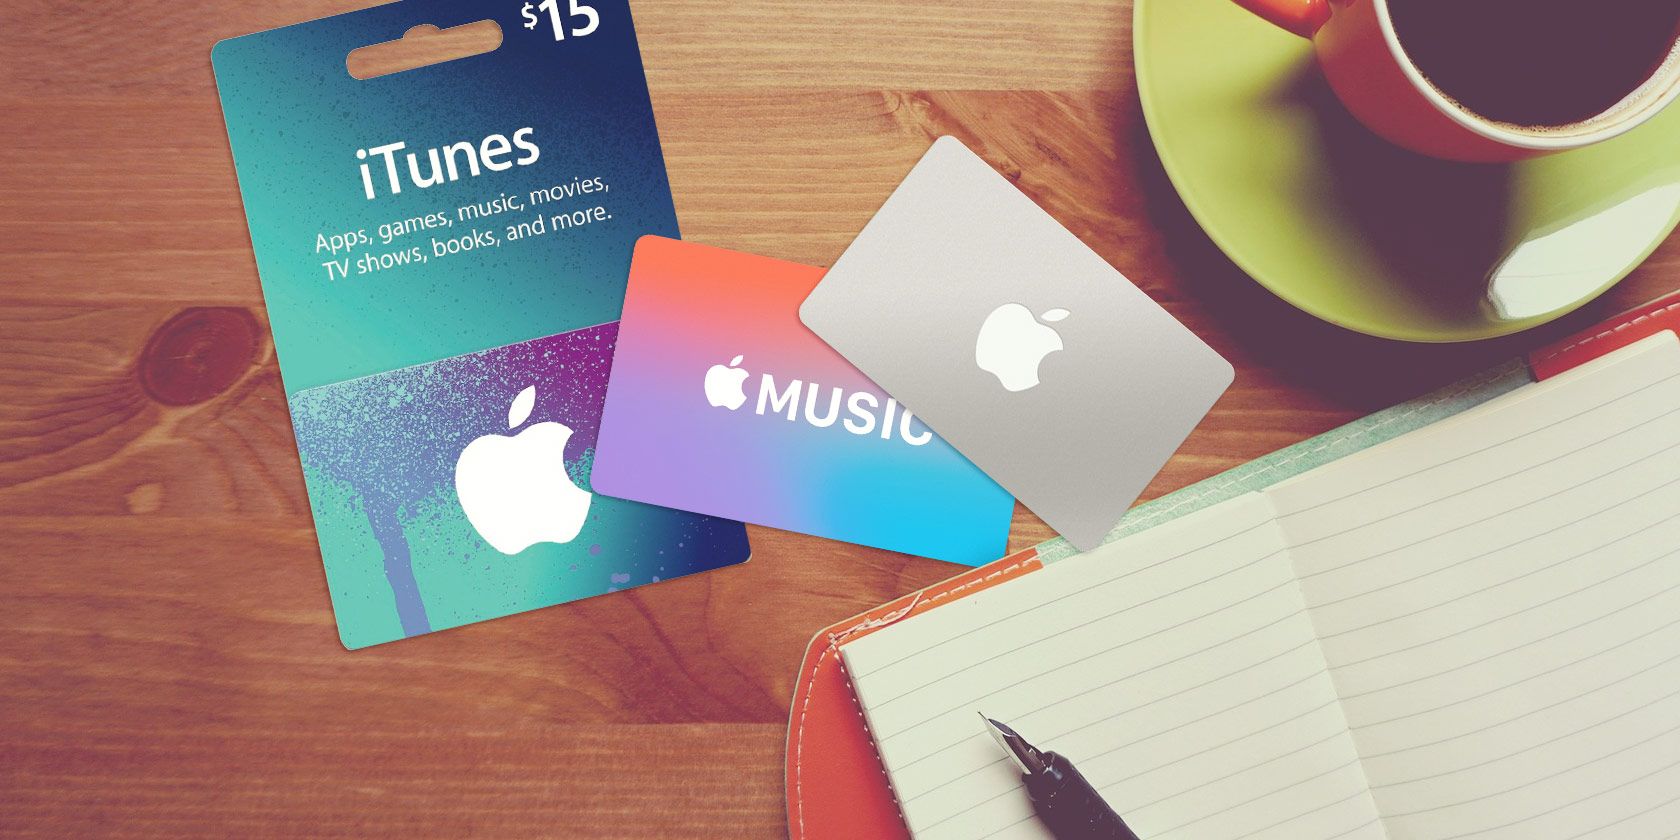 INR 1500 Itunes Gift Card Code (Code Only) : Amazon.in: Video Games